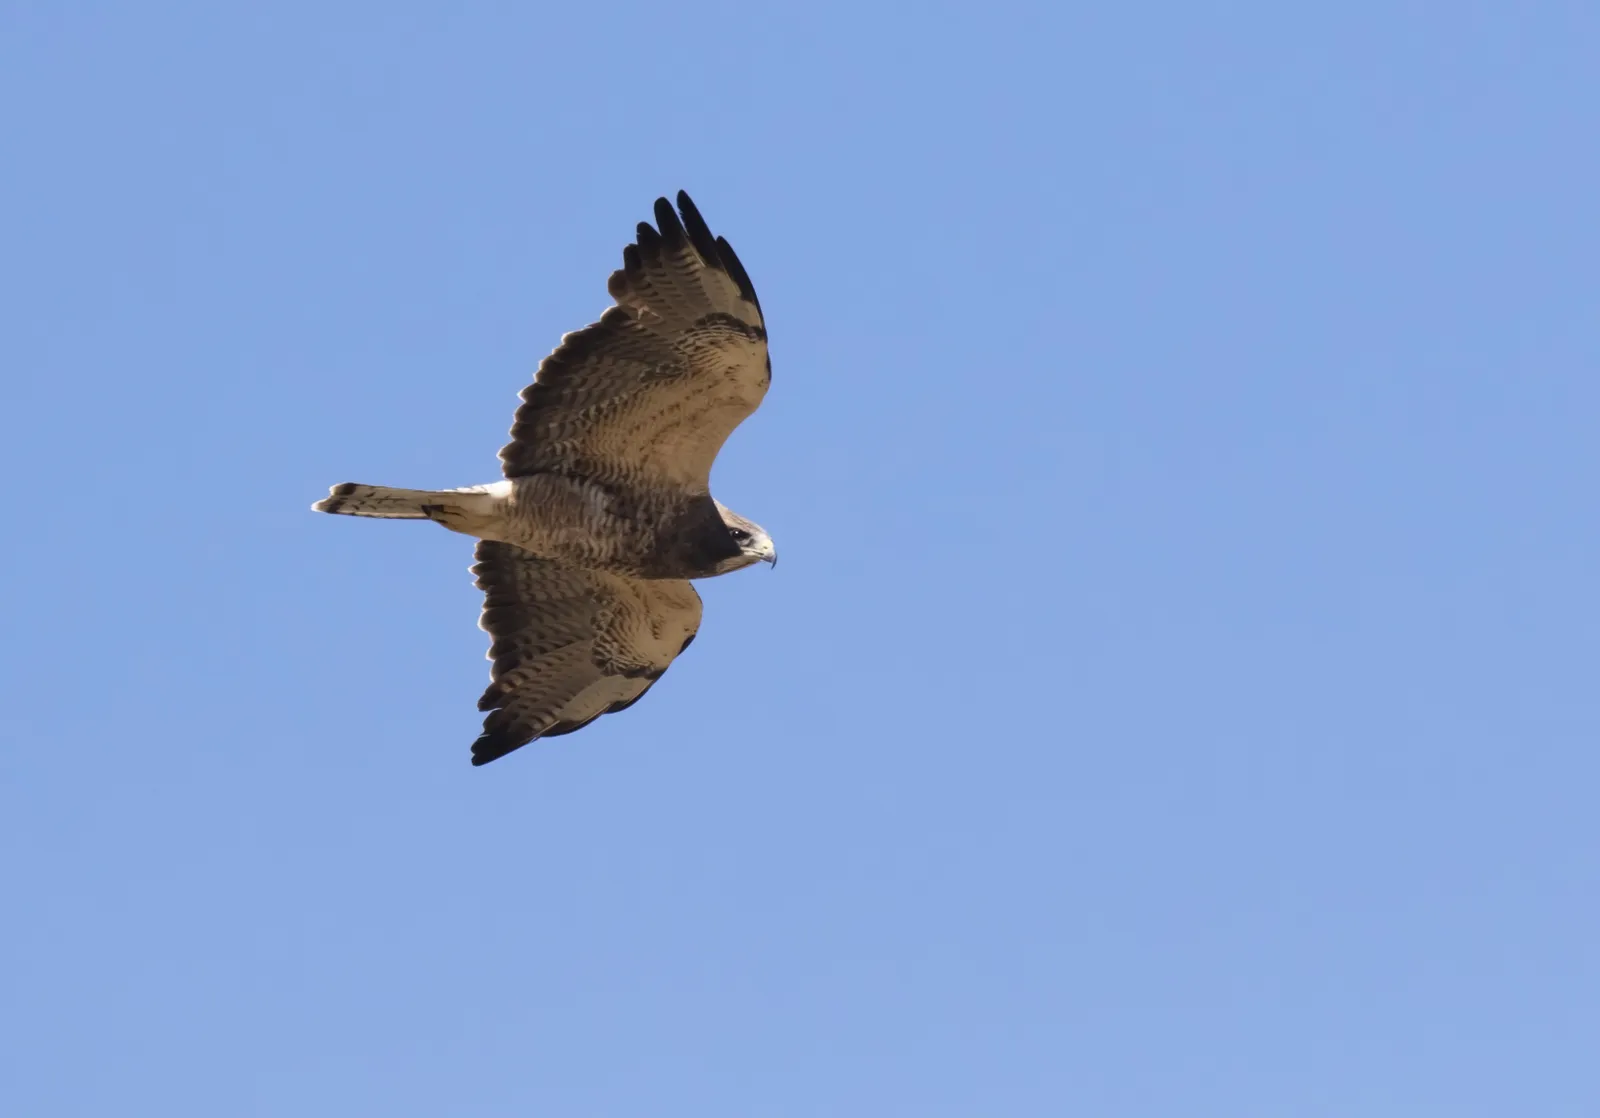 What Are the Largest Birds of Prey?